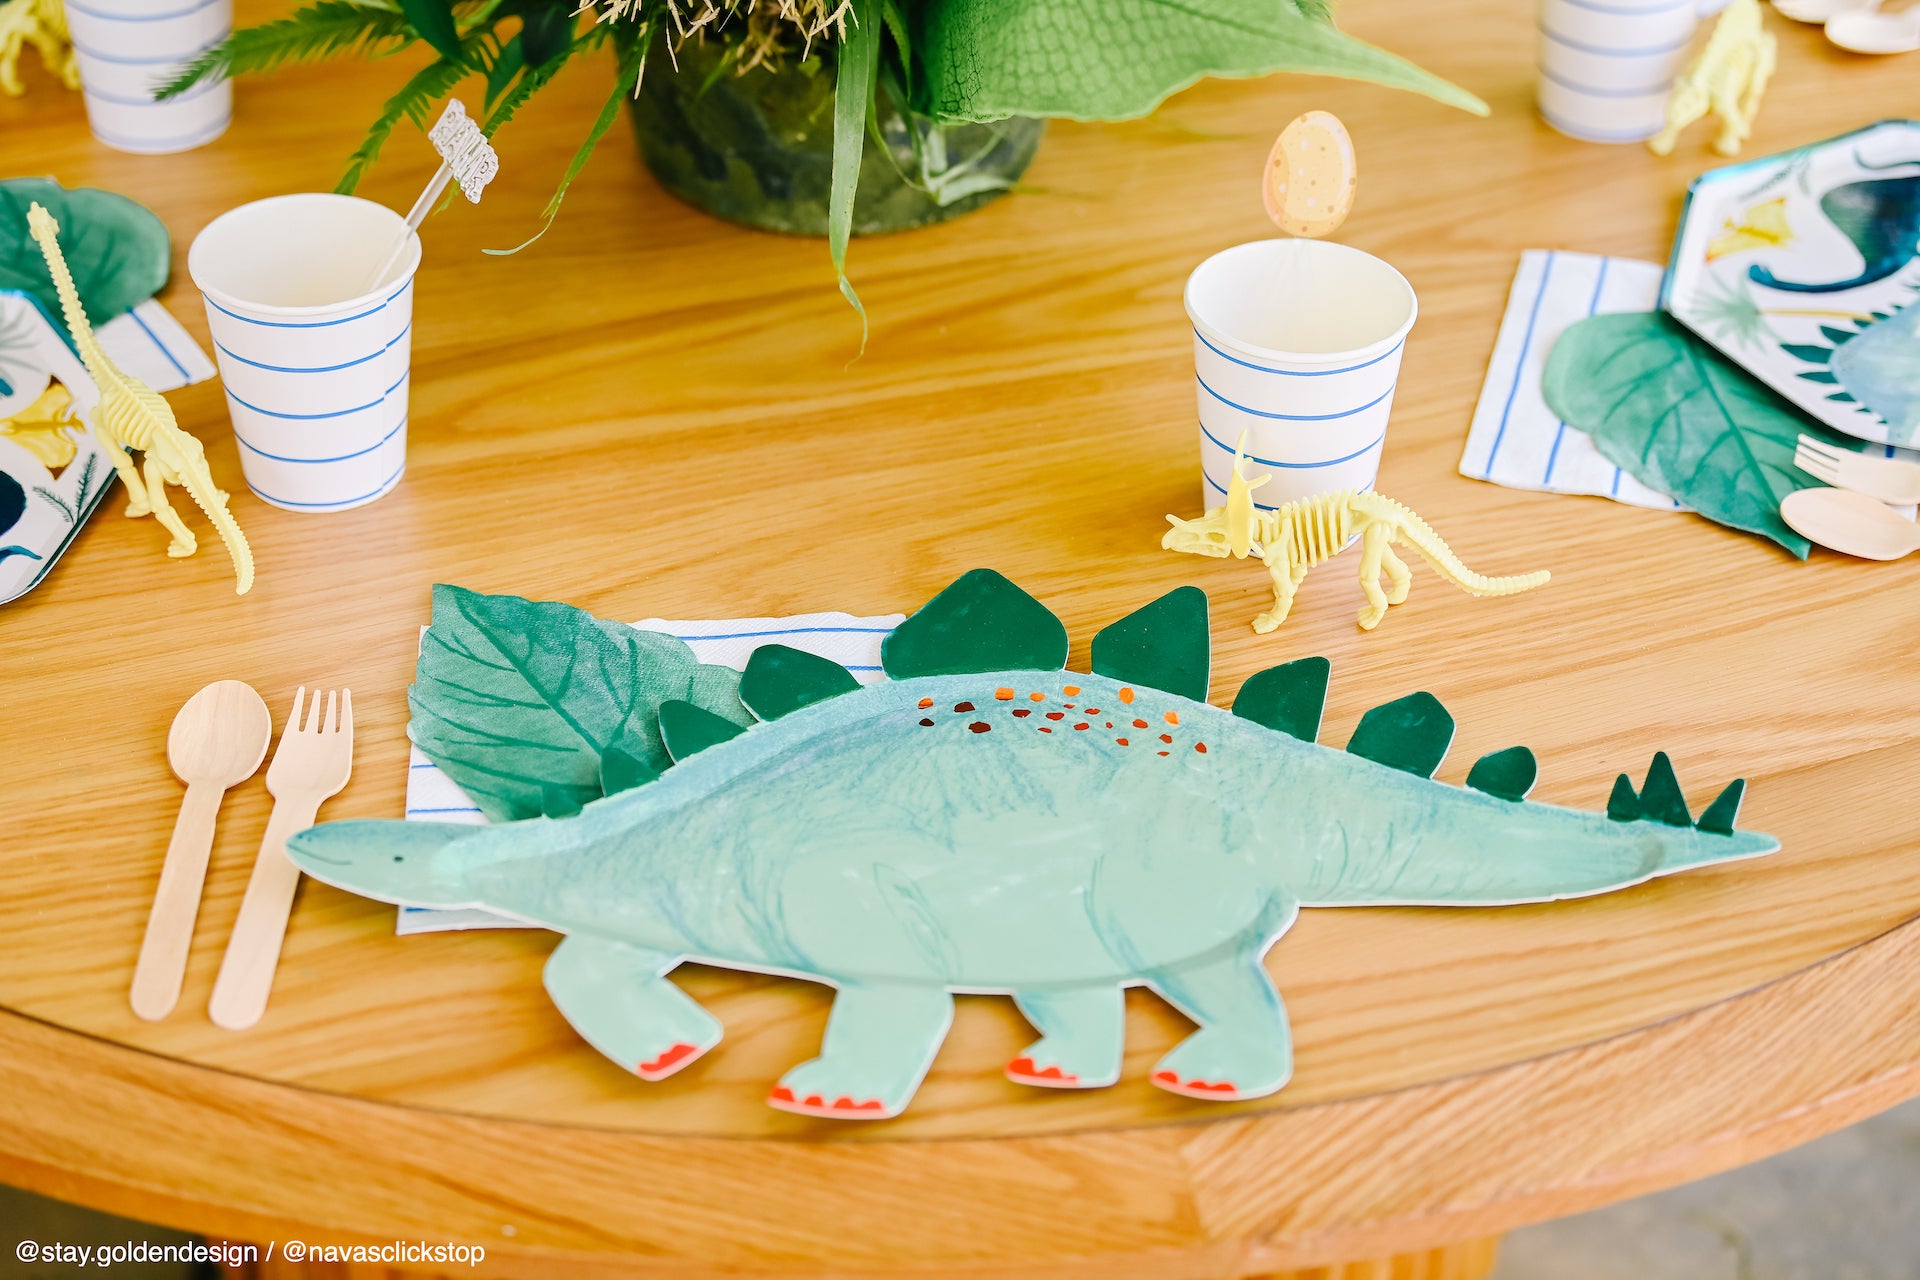 Dinosaur theme party supplies for a boy's birthday party.